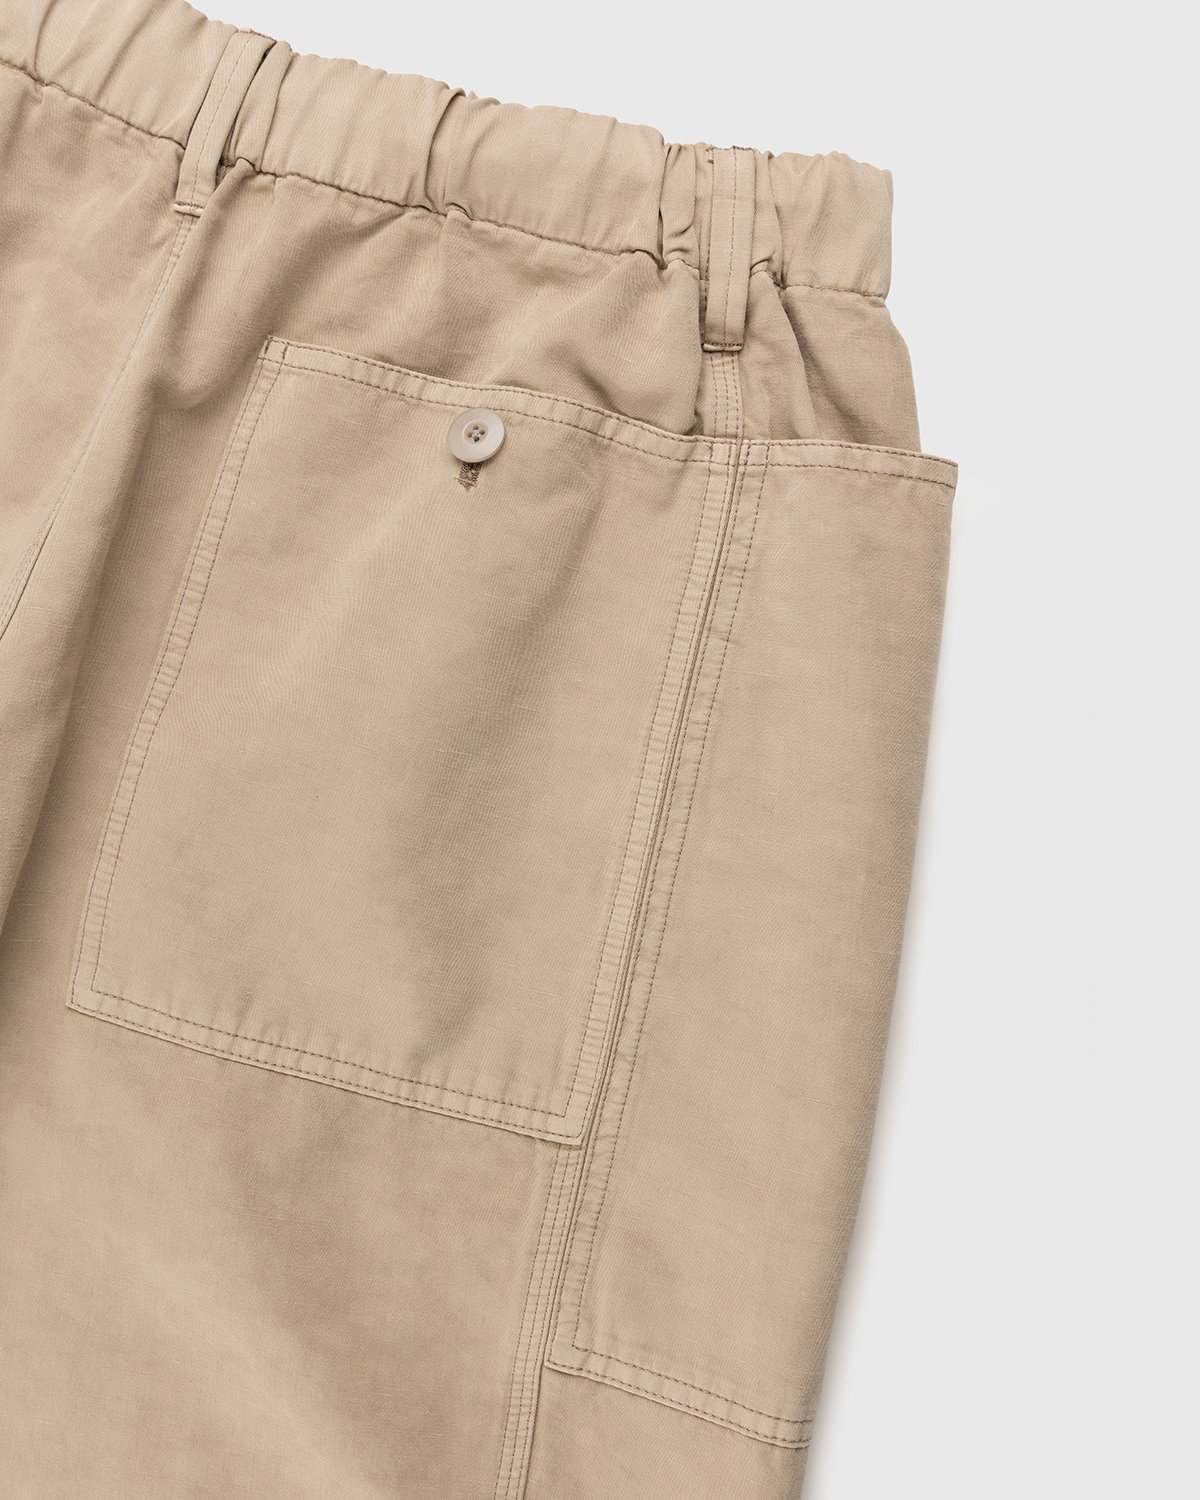 Lemaire - Fatigue Pants Natural Beige - Clothing - Beige - Image 3